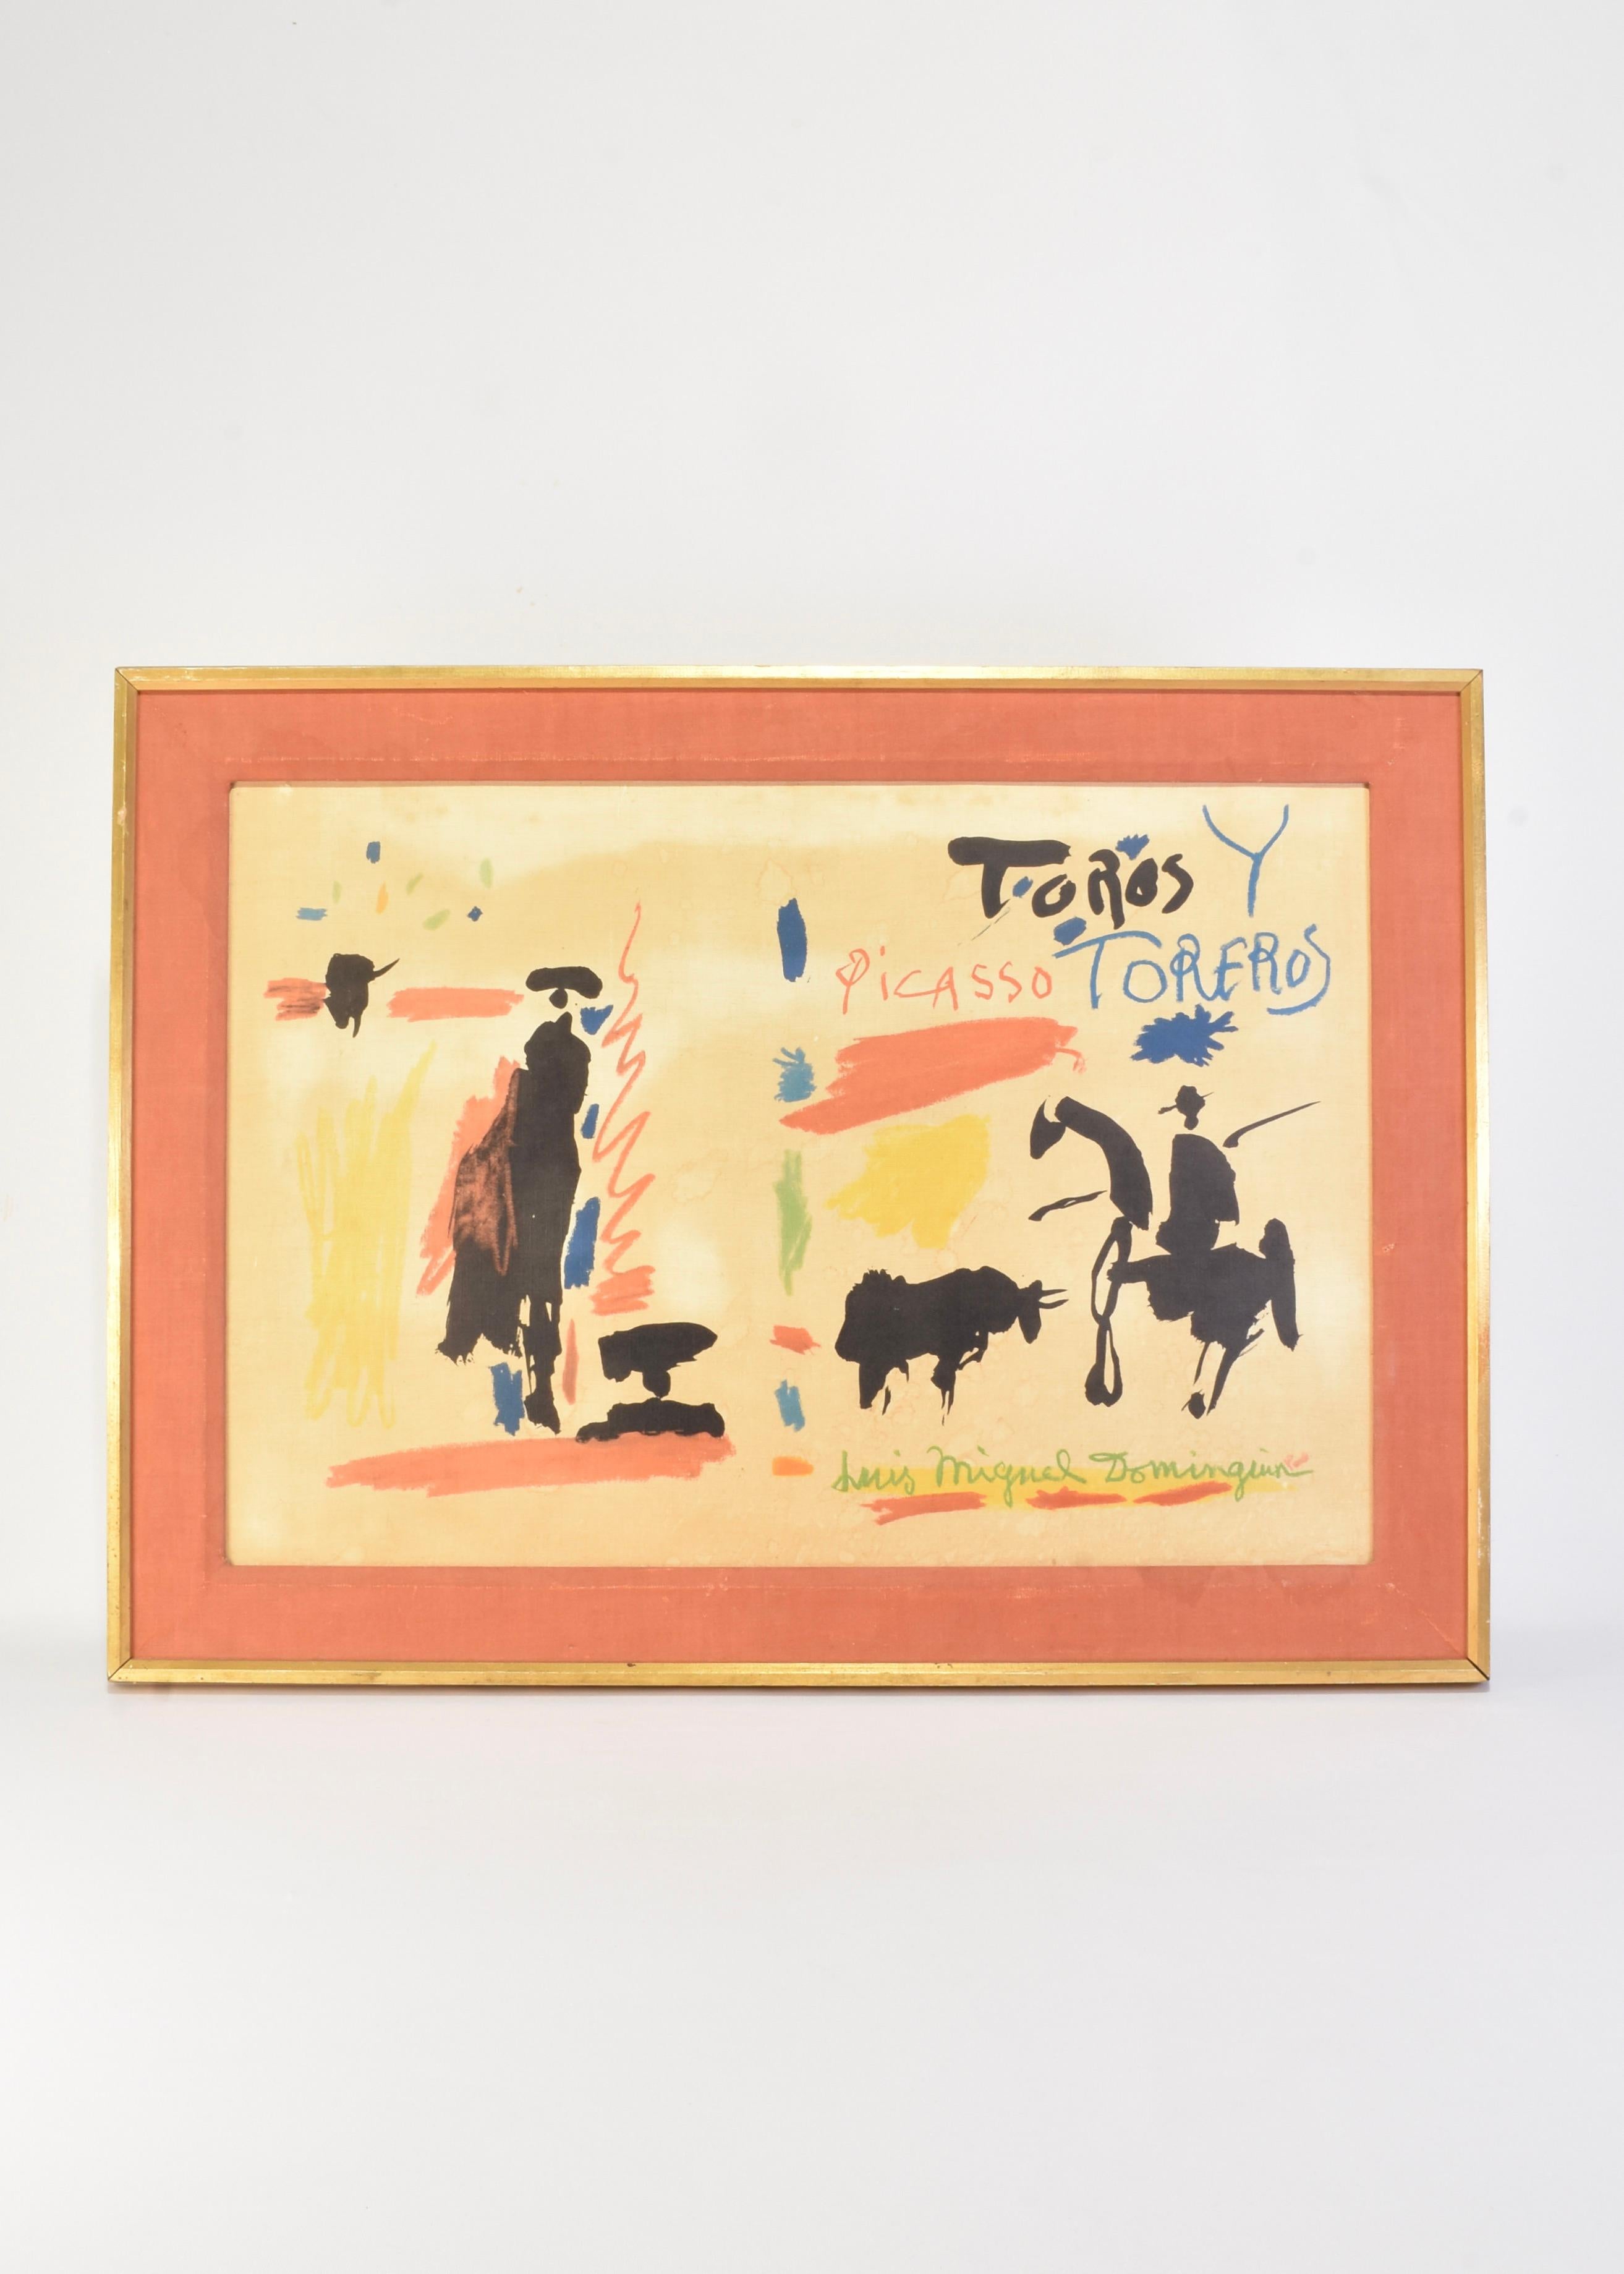 Rare, vintage artwork featuring Picasso's 'Toros Y Toreros, Luis Miguel Domingiun'. 

Framed in original gilt wood with red fabric matte. Frame does not include glass.